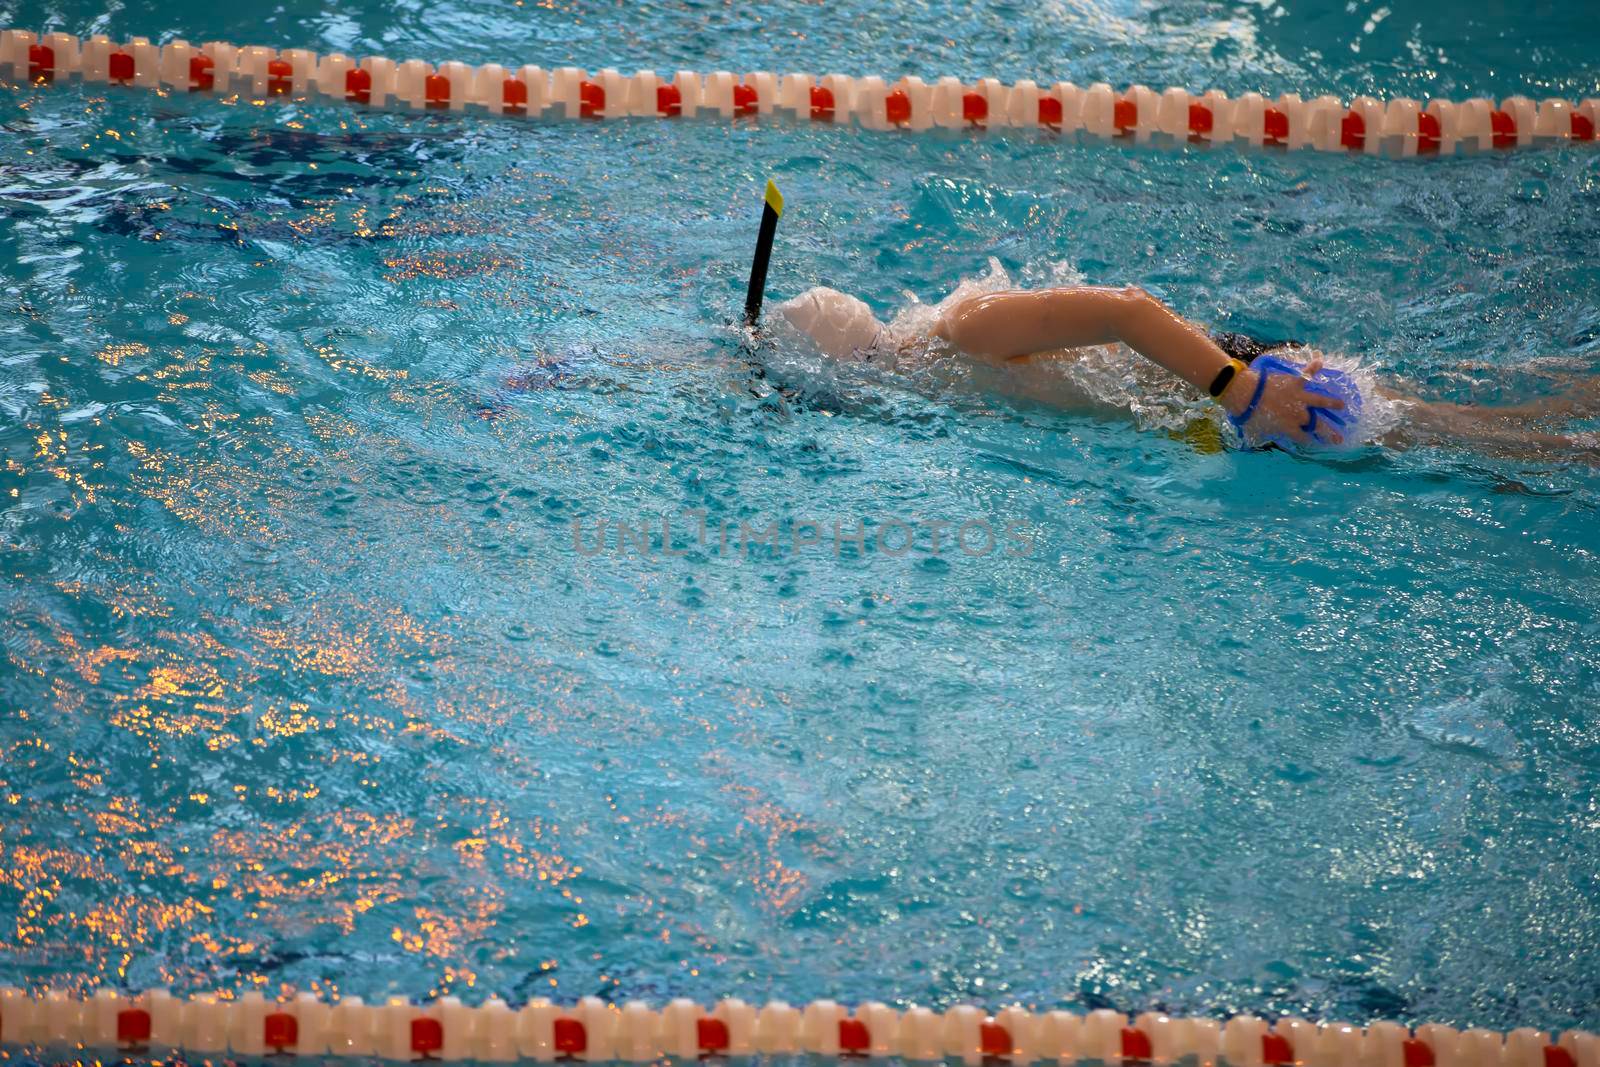 Child athlete swims in the pool. Swimming section.